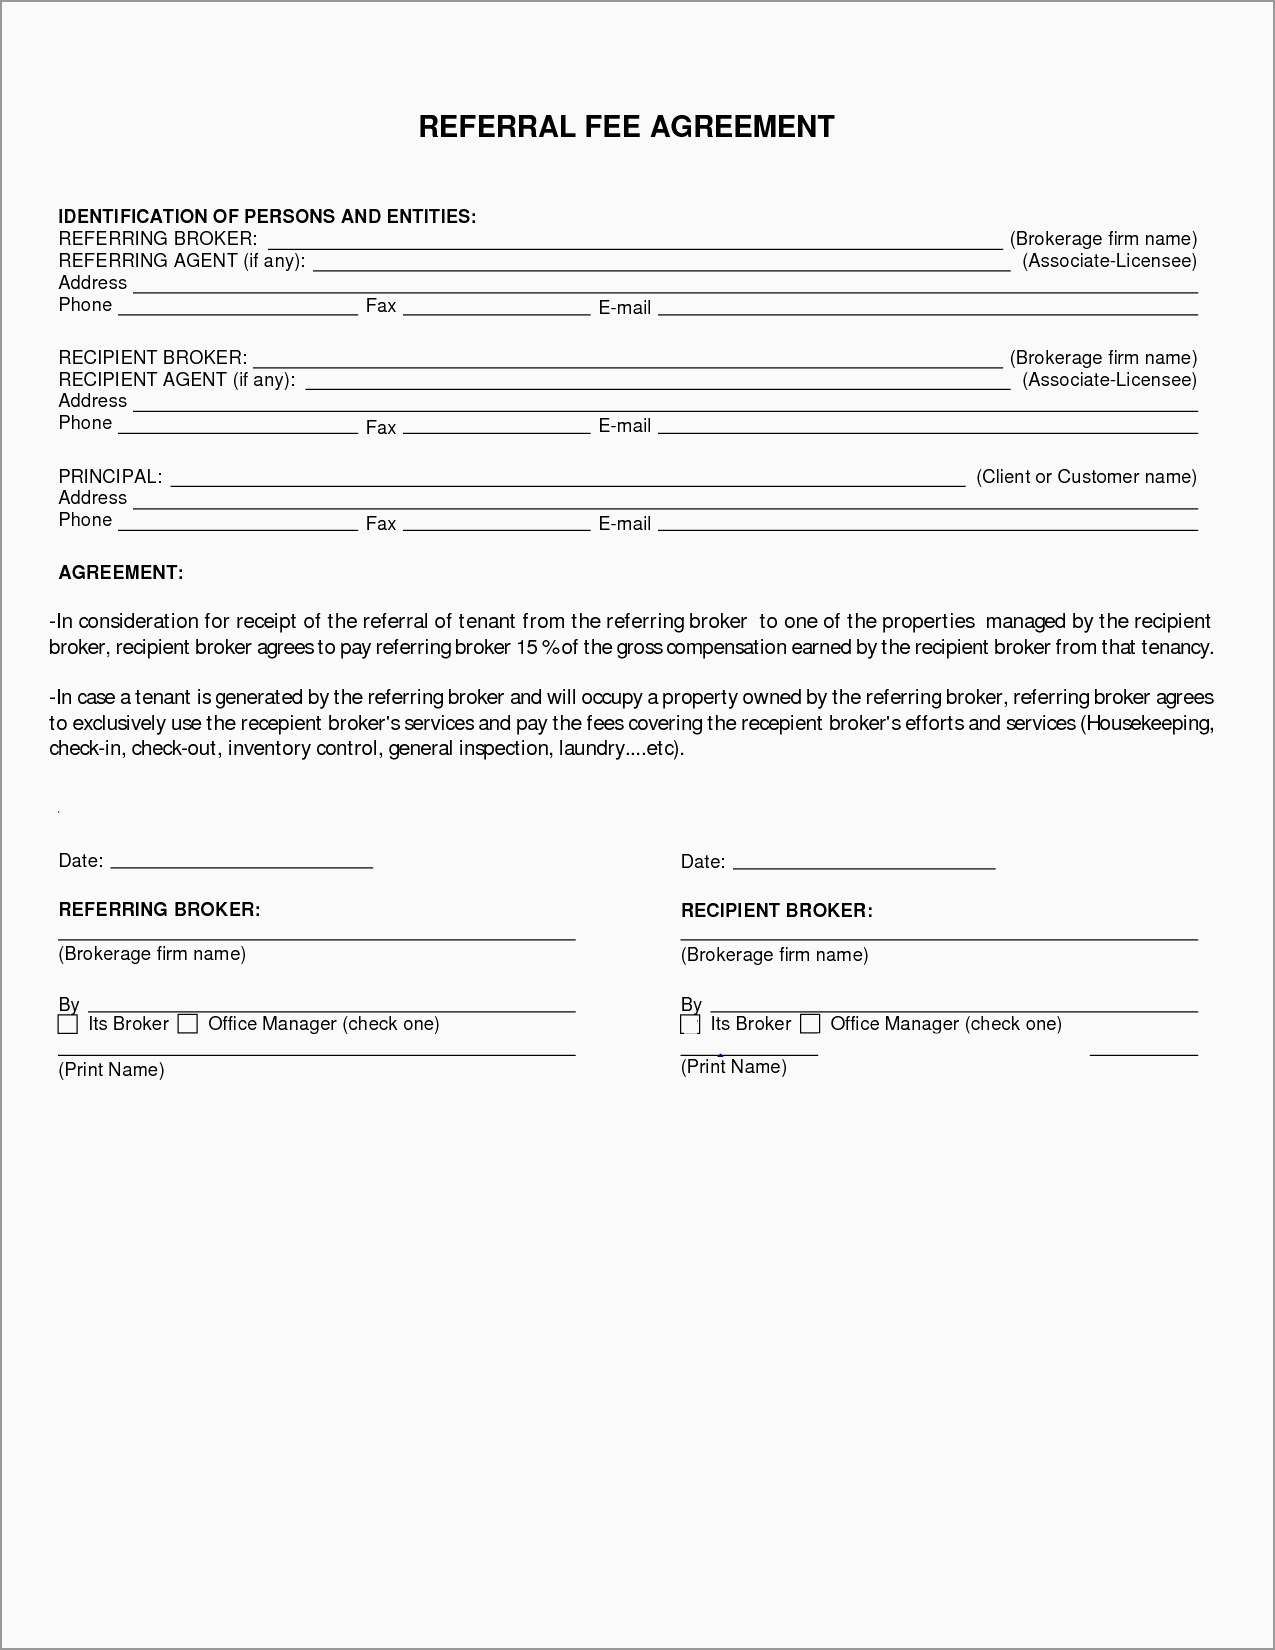 Free Real Estate Referral Form Template Astonishing Referral Fee within Real Estate Finders Fee Agreement Template